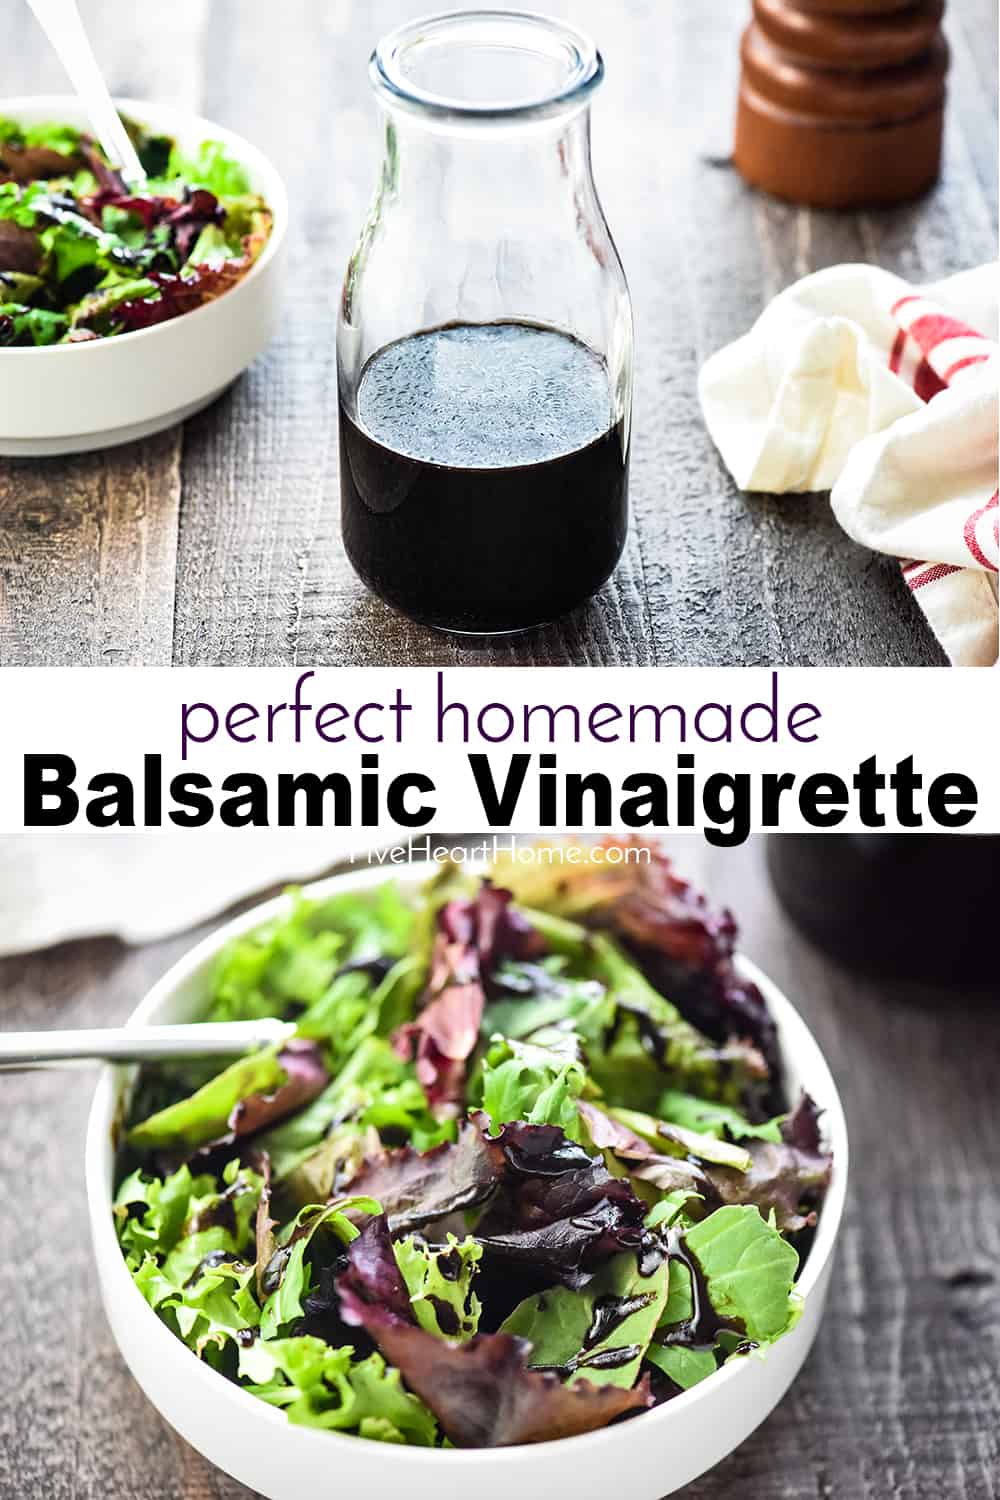 Balsamic Vinaigrette ~ this classic salad dressing recipe is silky smooth and zippy yet balanced, perfect for drizzling over salads, roasted veggies, or using as a marinade! | FiveHeartHome.com #balsamicvinaigrette via @fivehearthome